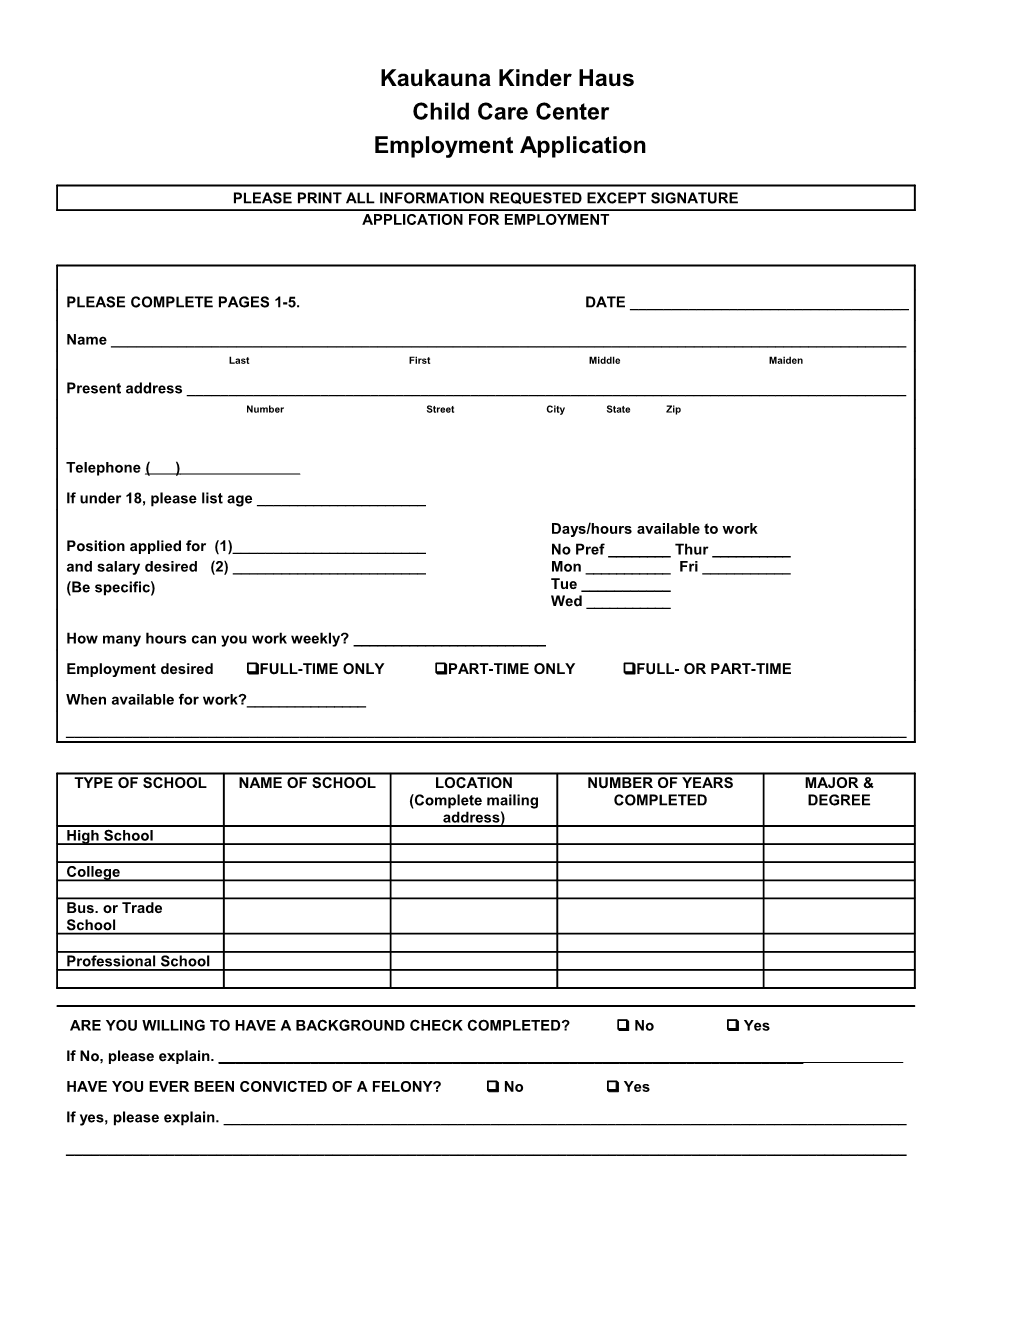 Sample Employment Application Form s3